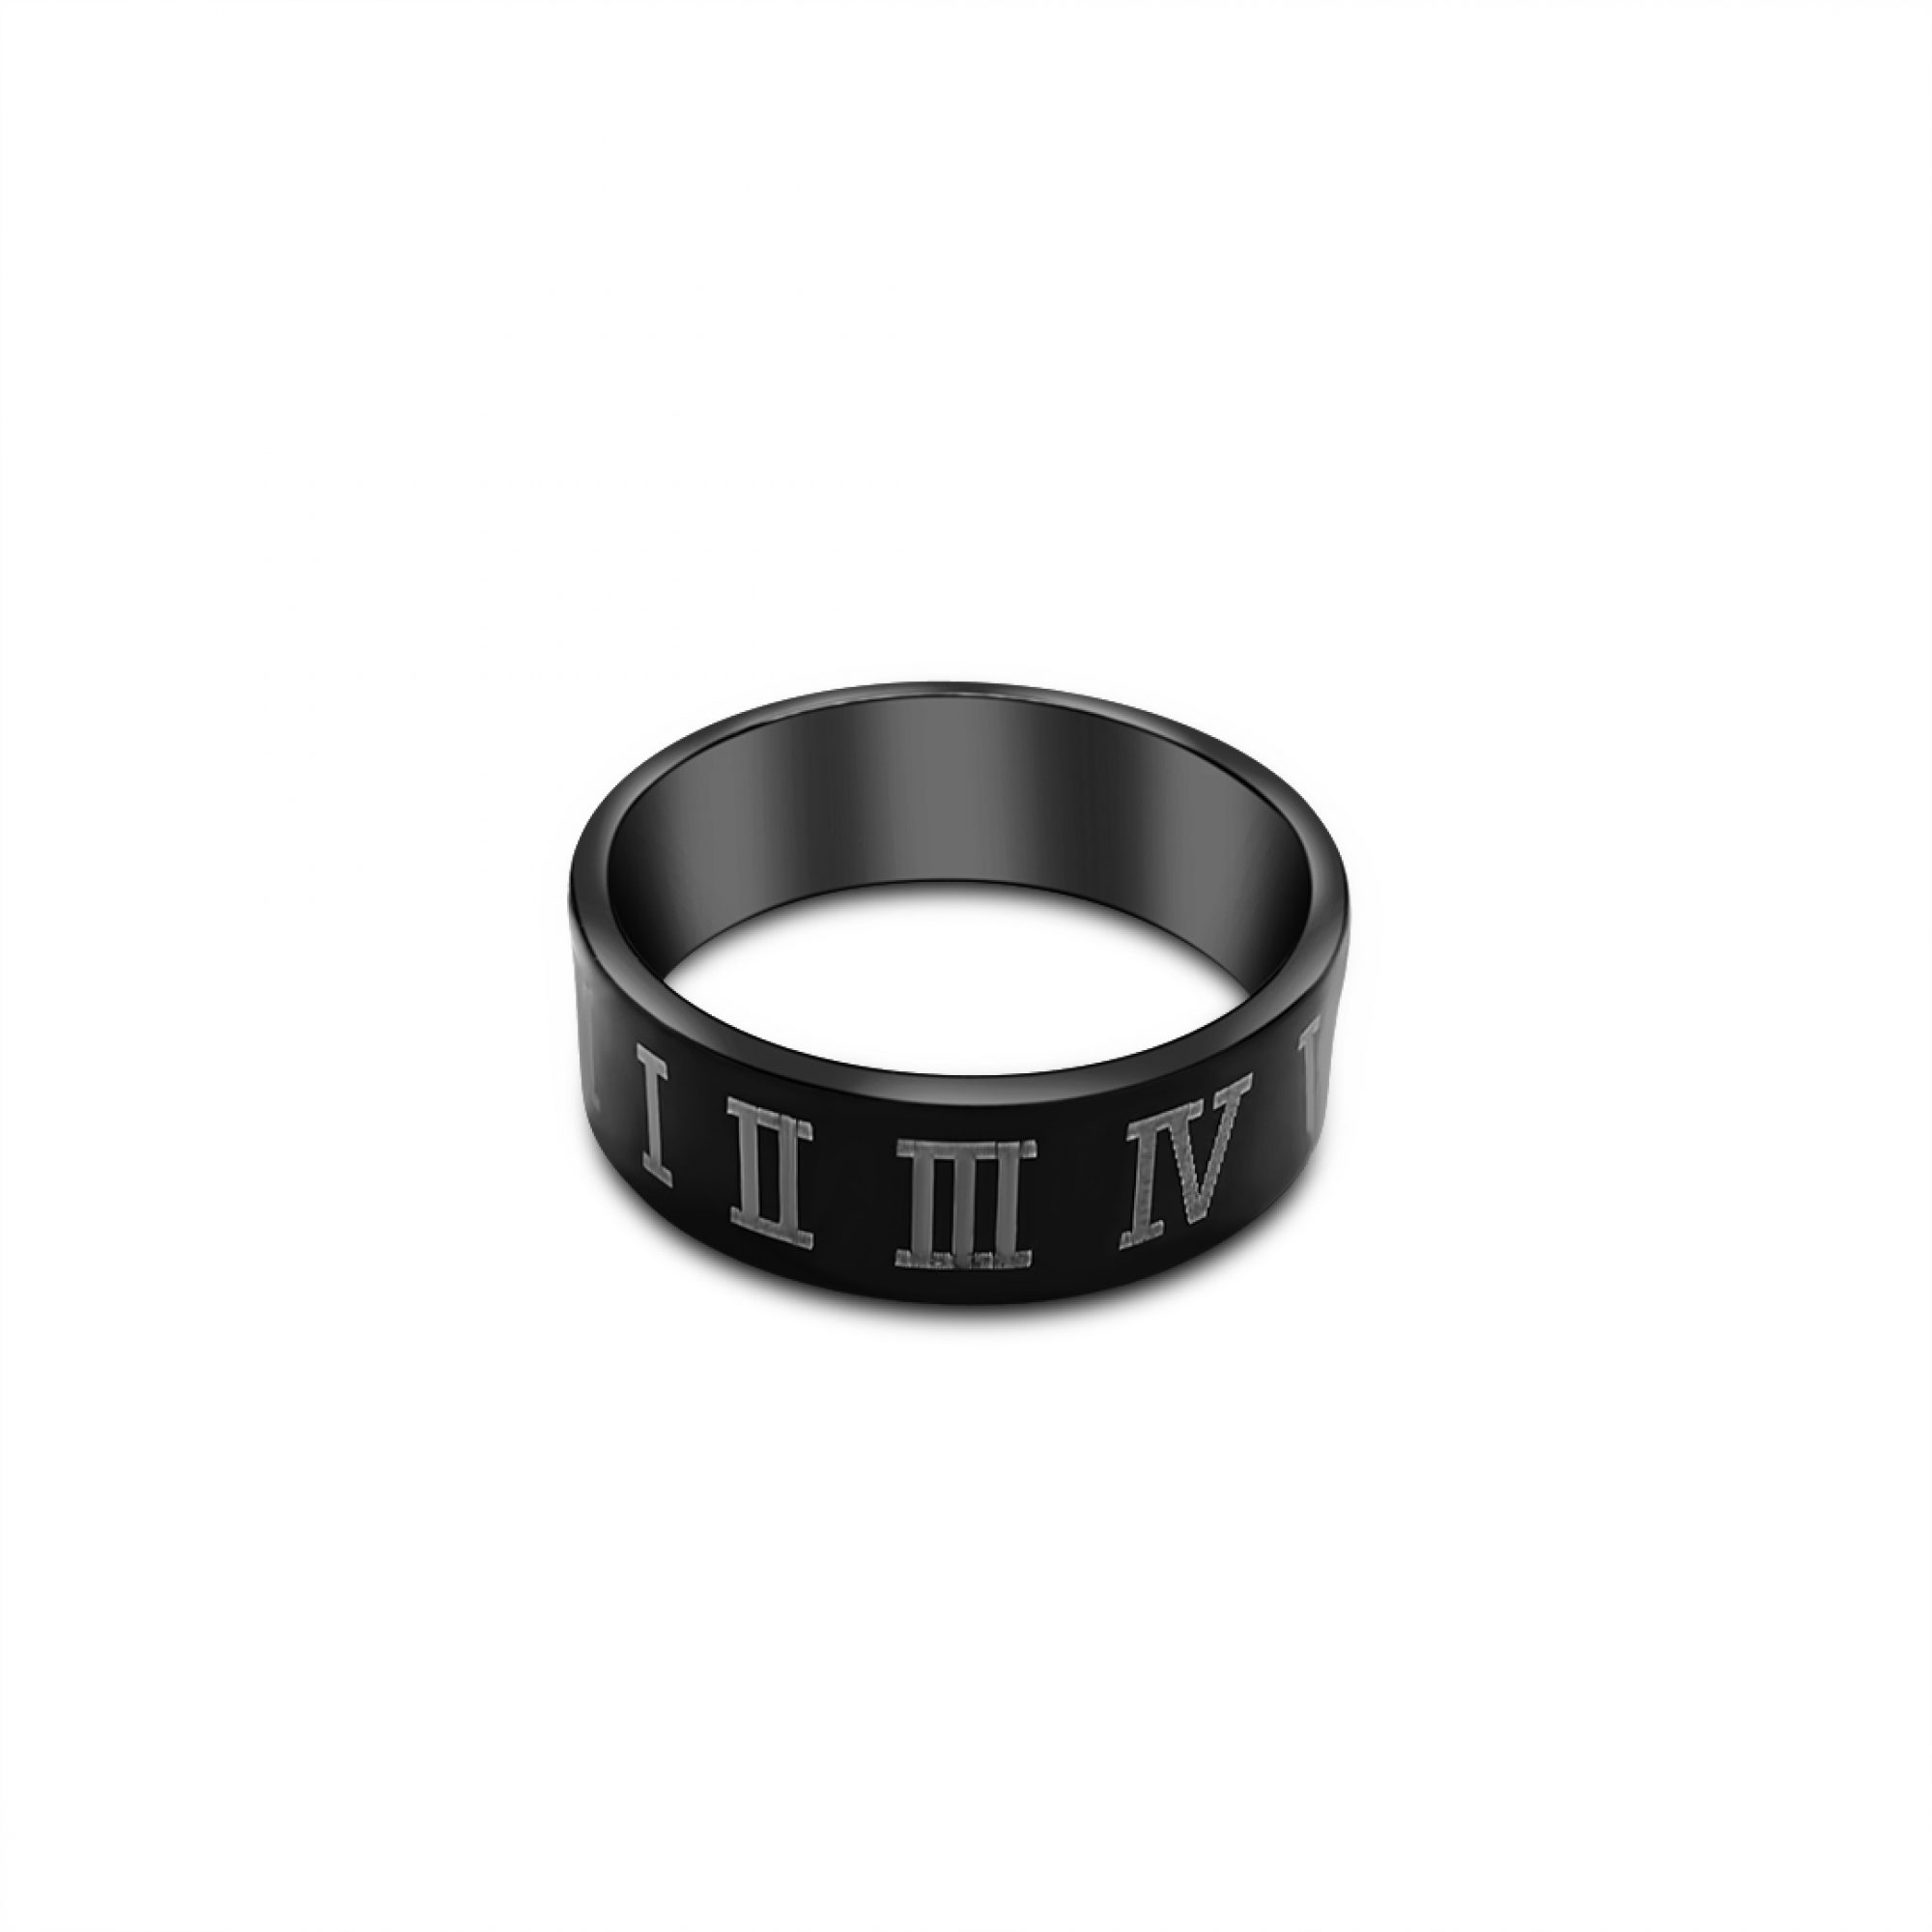 Black steel ring with Latin numbers